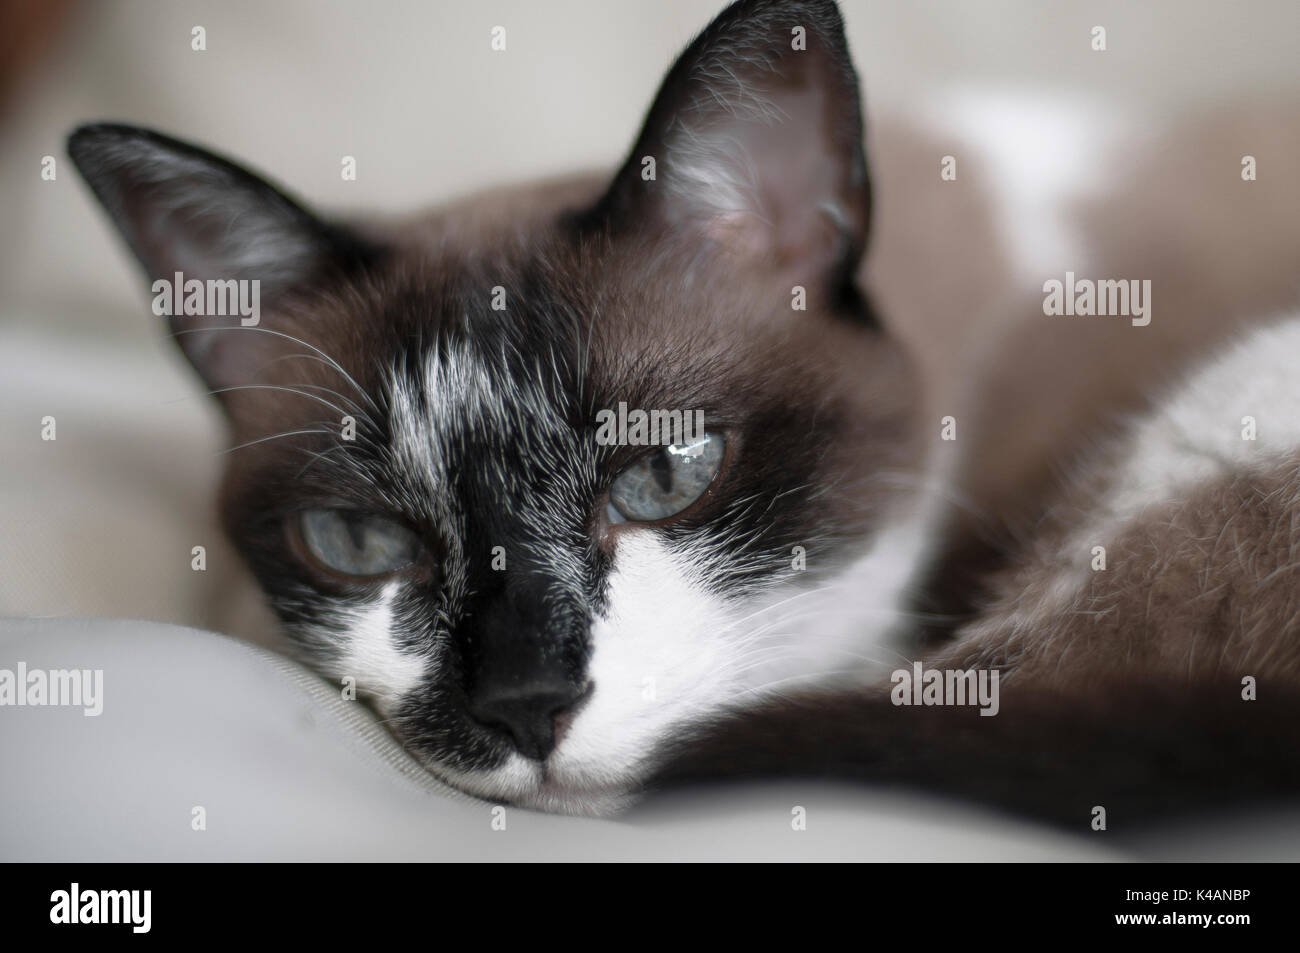 cat resting on pillow Stock Photo